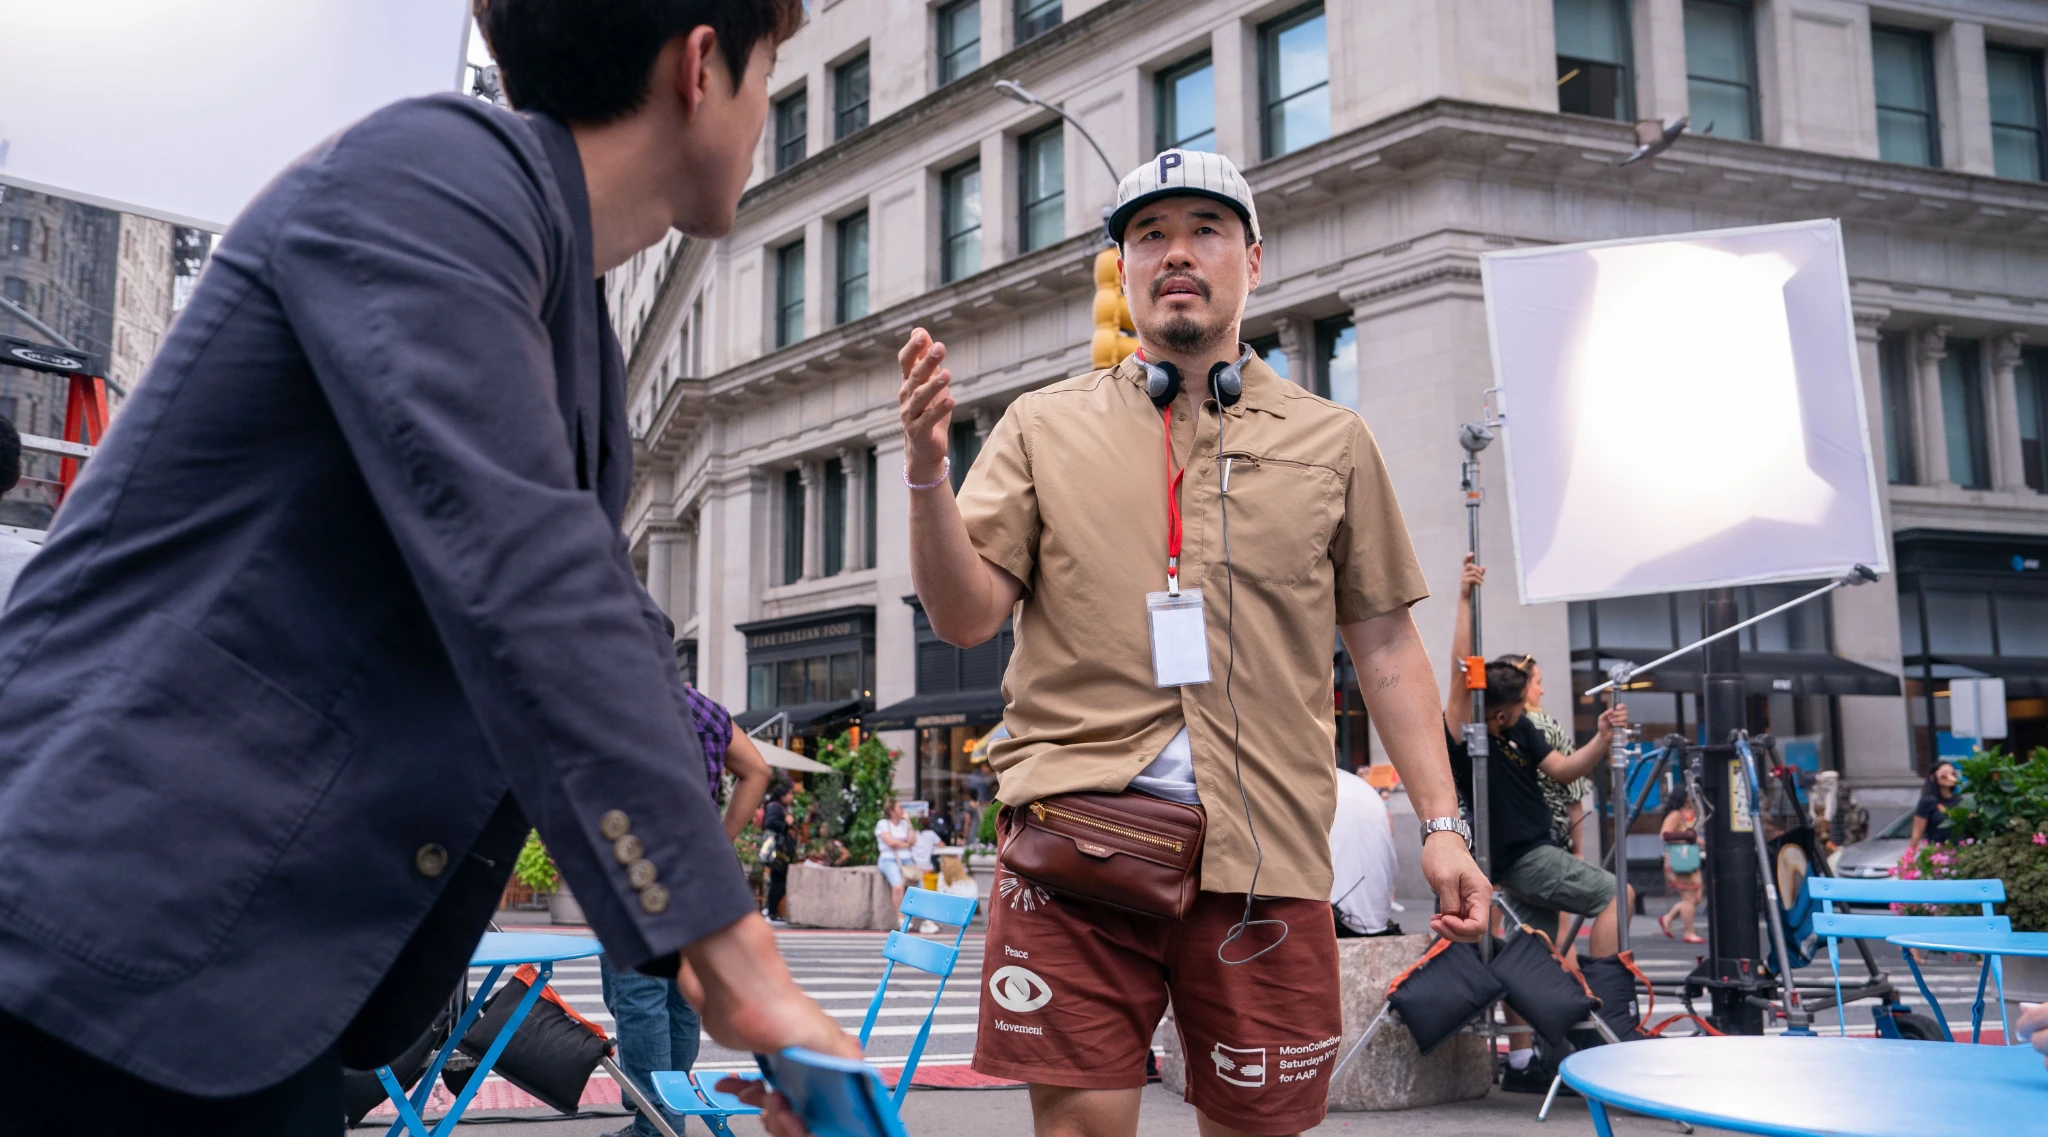 Randall Park's Secret to Directing His First Movie: 'Stay Positive No Matter What' (Exclusive)